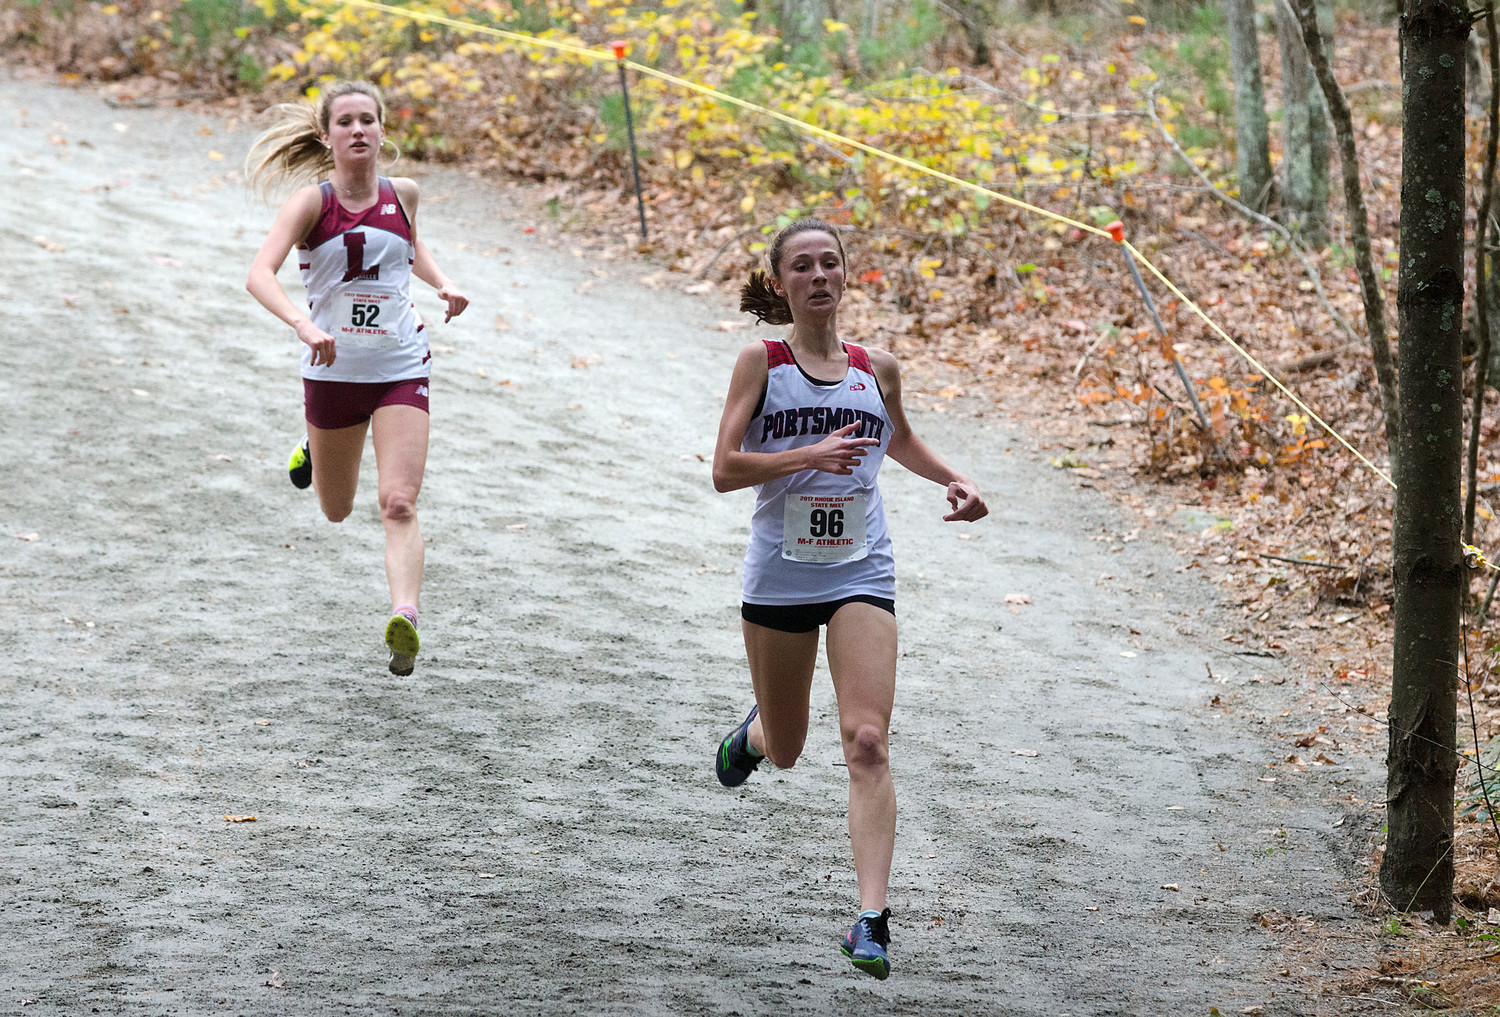 Portsmouth's Nikki Merrill flies down a dirt hill on the wooded part of the course.